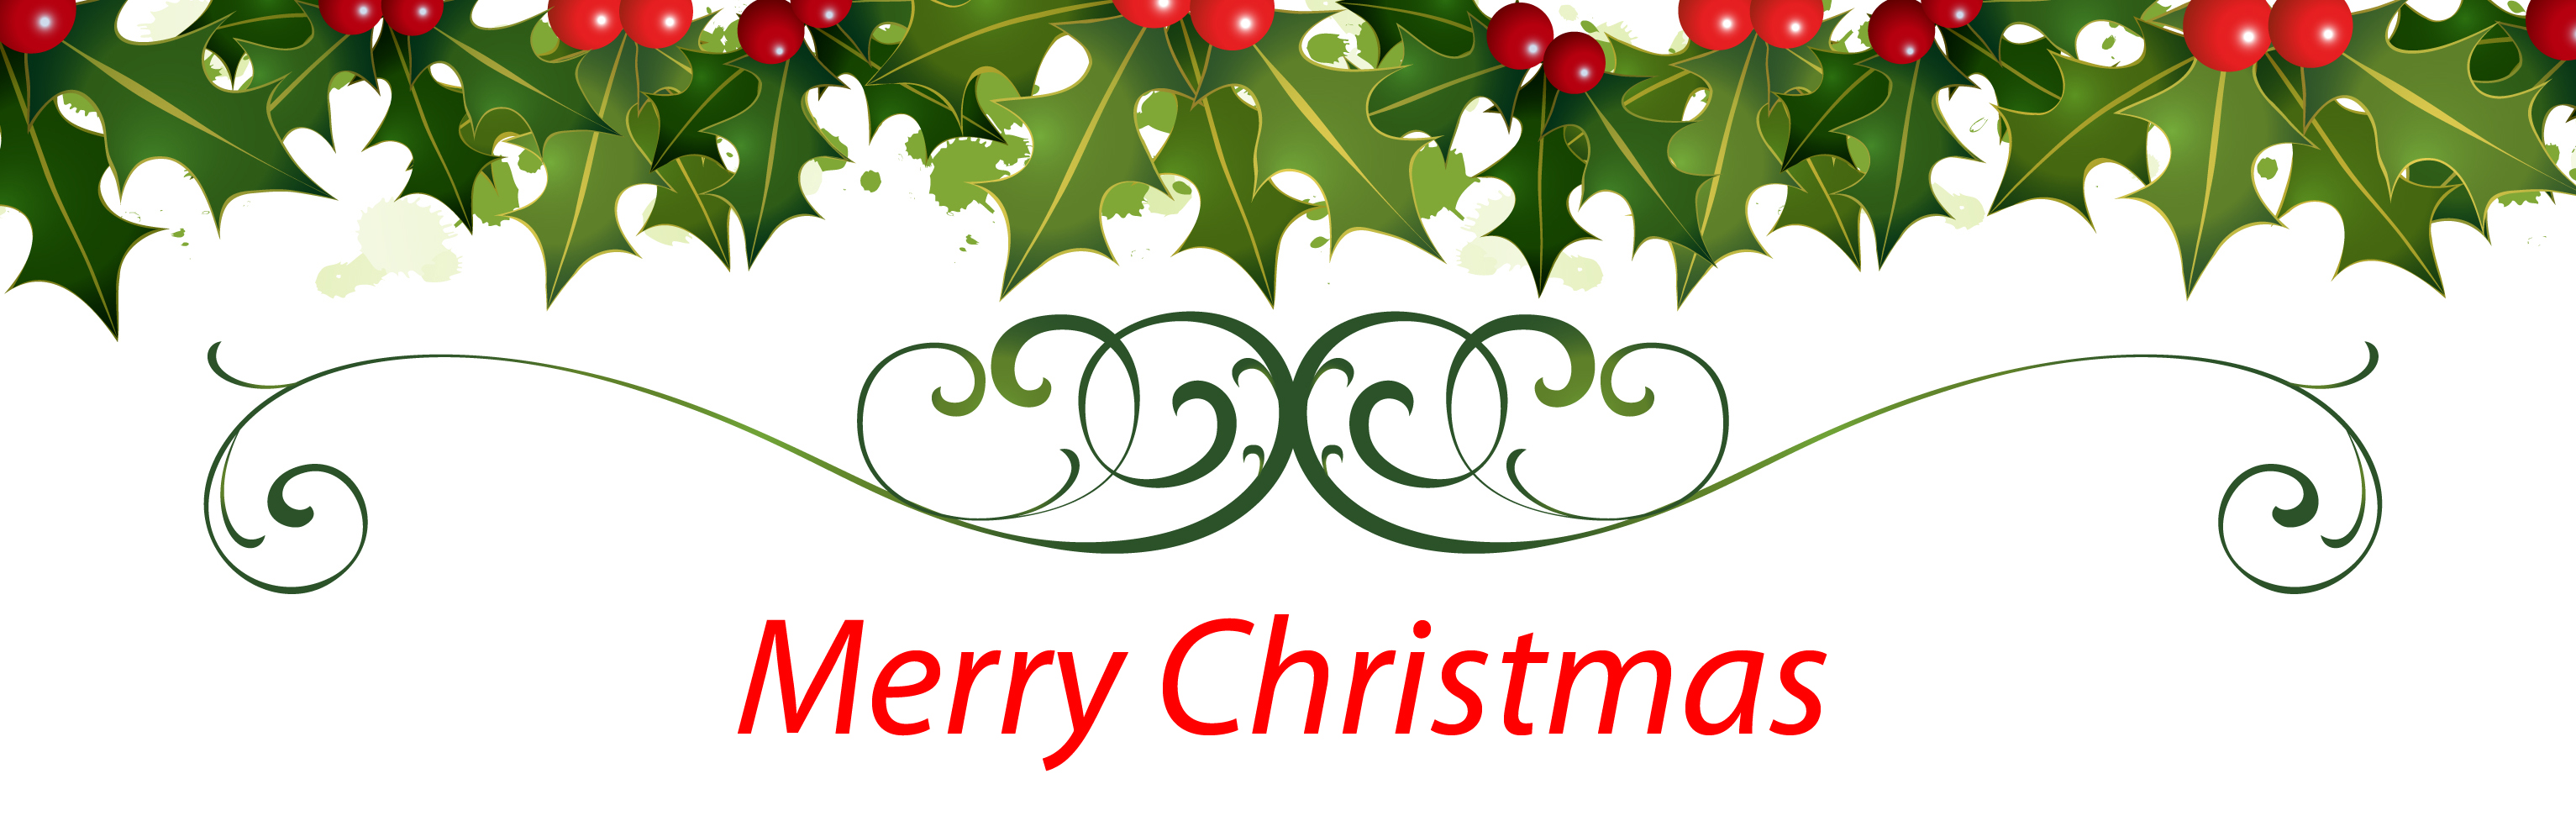 merry christmas greetings from beverly heights dental